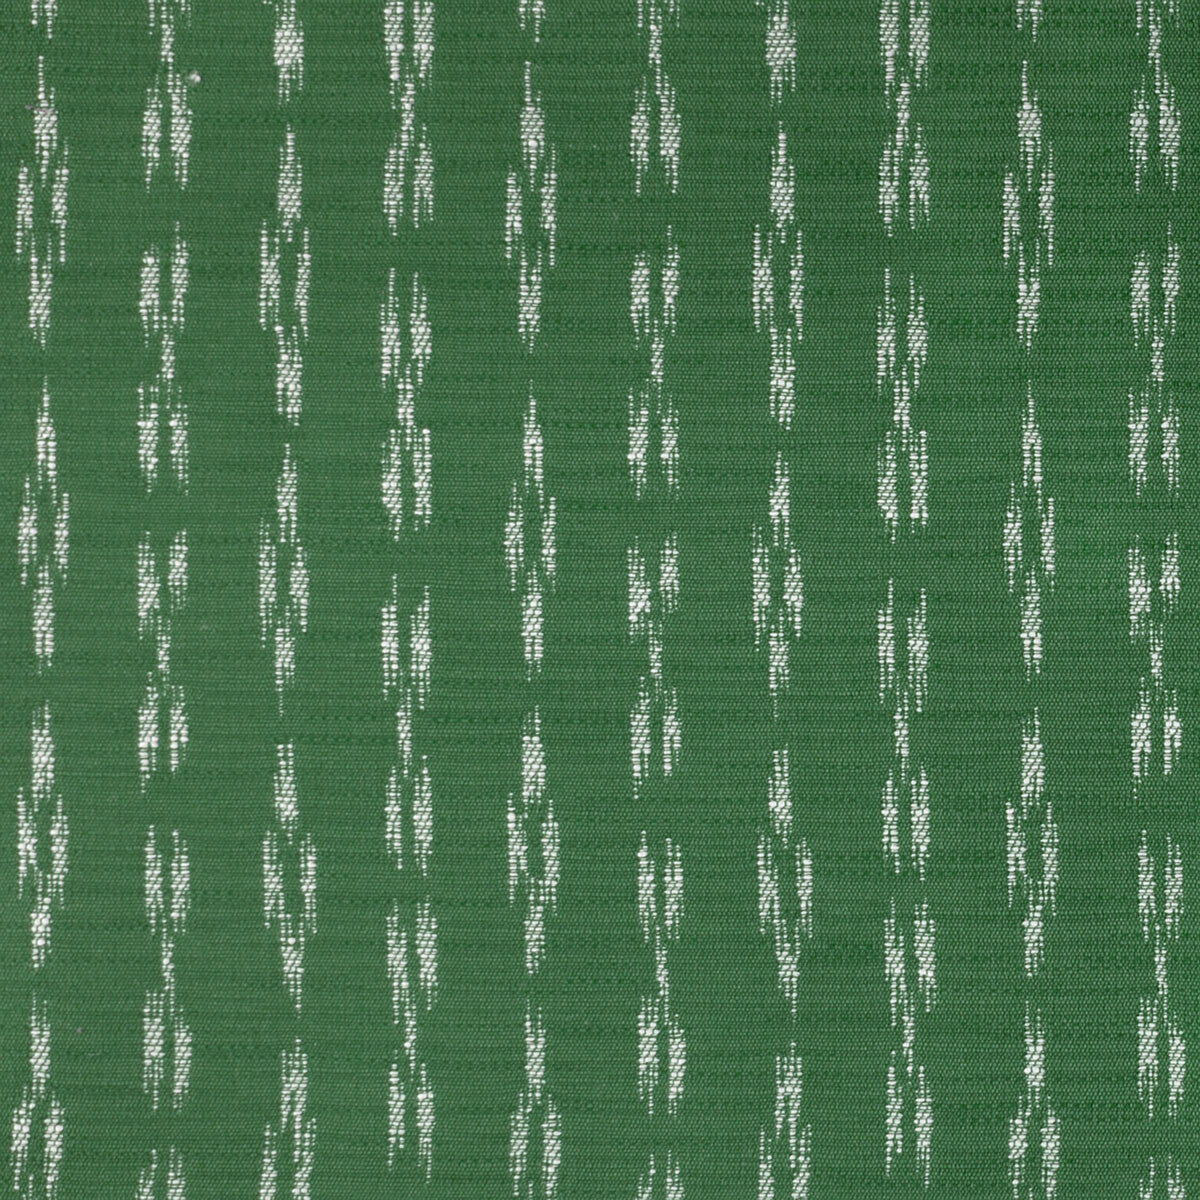 Yoko fabric in verde color - pattern GDT5647.005.0 - by Gaston y Daniela in the Gaston Japon collection